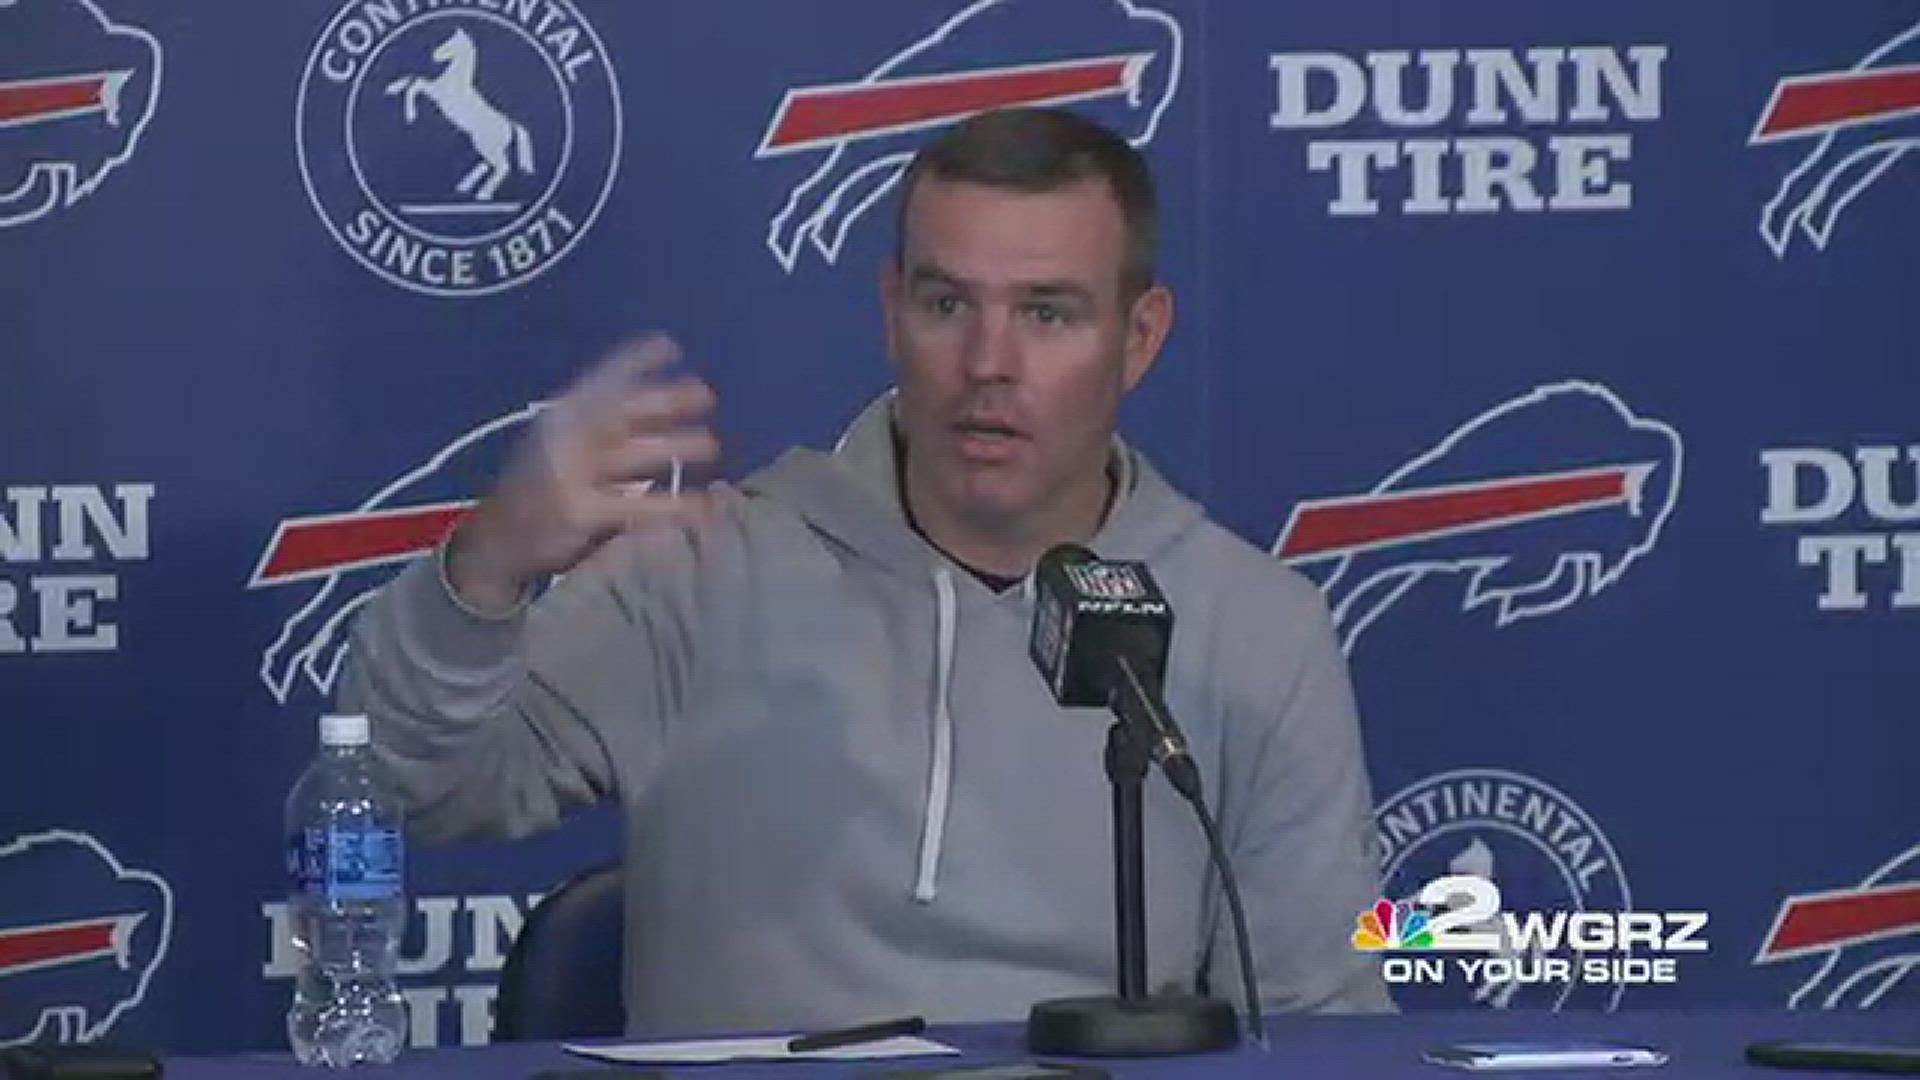 Buffalo Bills general manager Brandon Beane discussed NFL Draft on Saturday evening, after the team made their final pick.